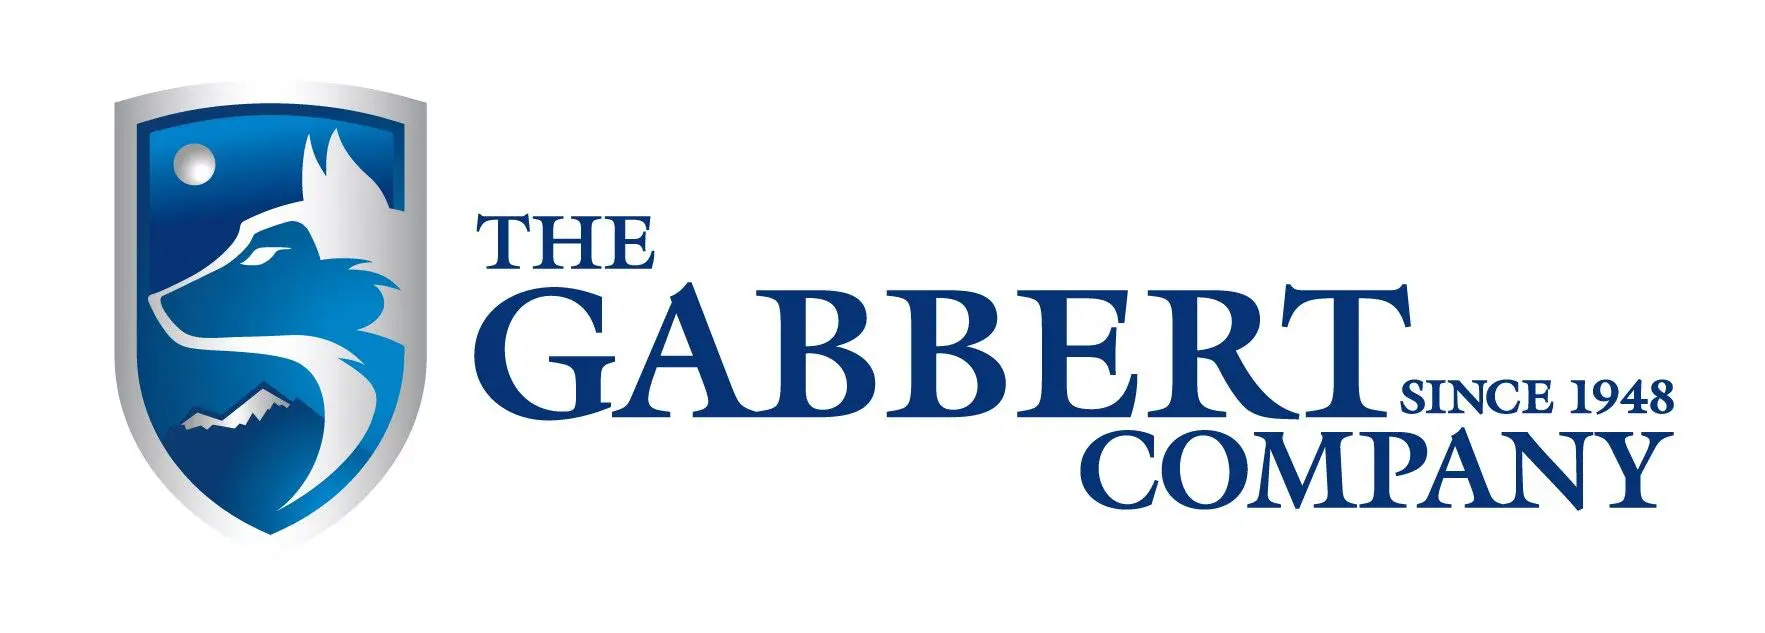 A blue and white logo for the gabberville company.